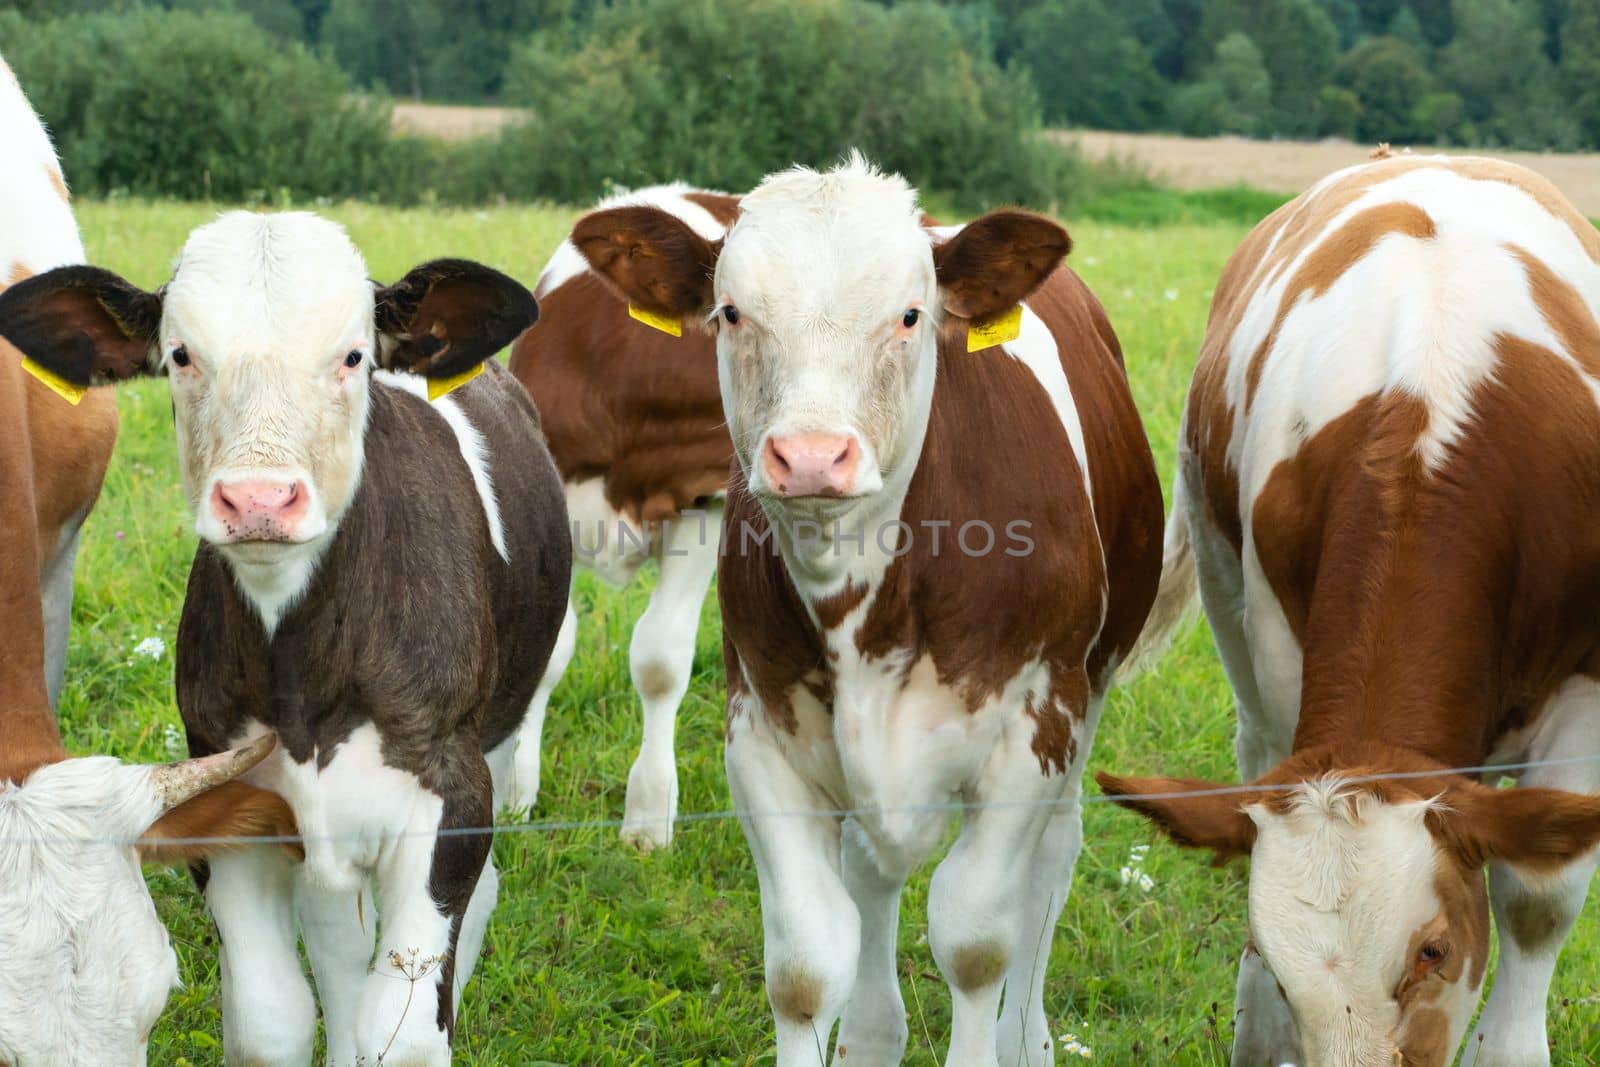 Two cow calves in a herd in the meadow, summer day